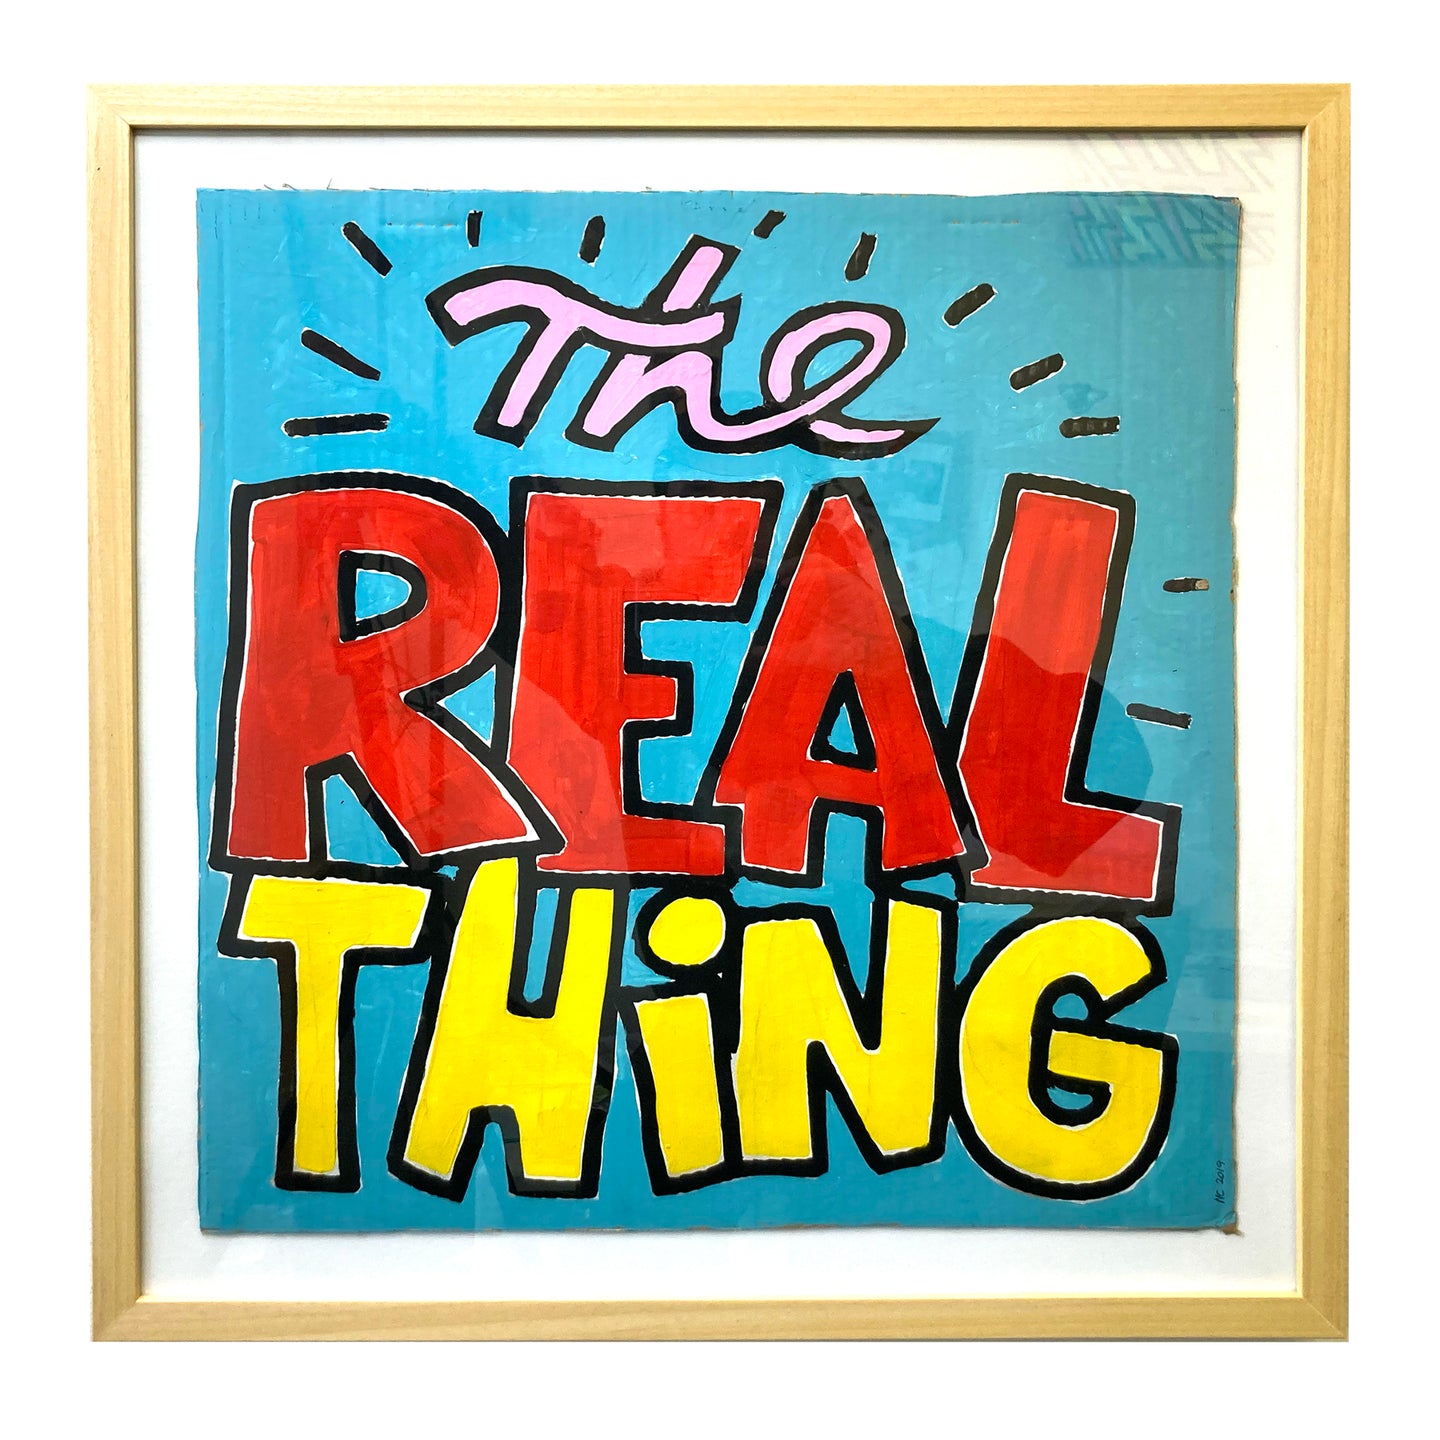 The REAL THING